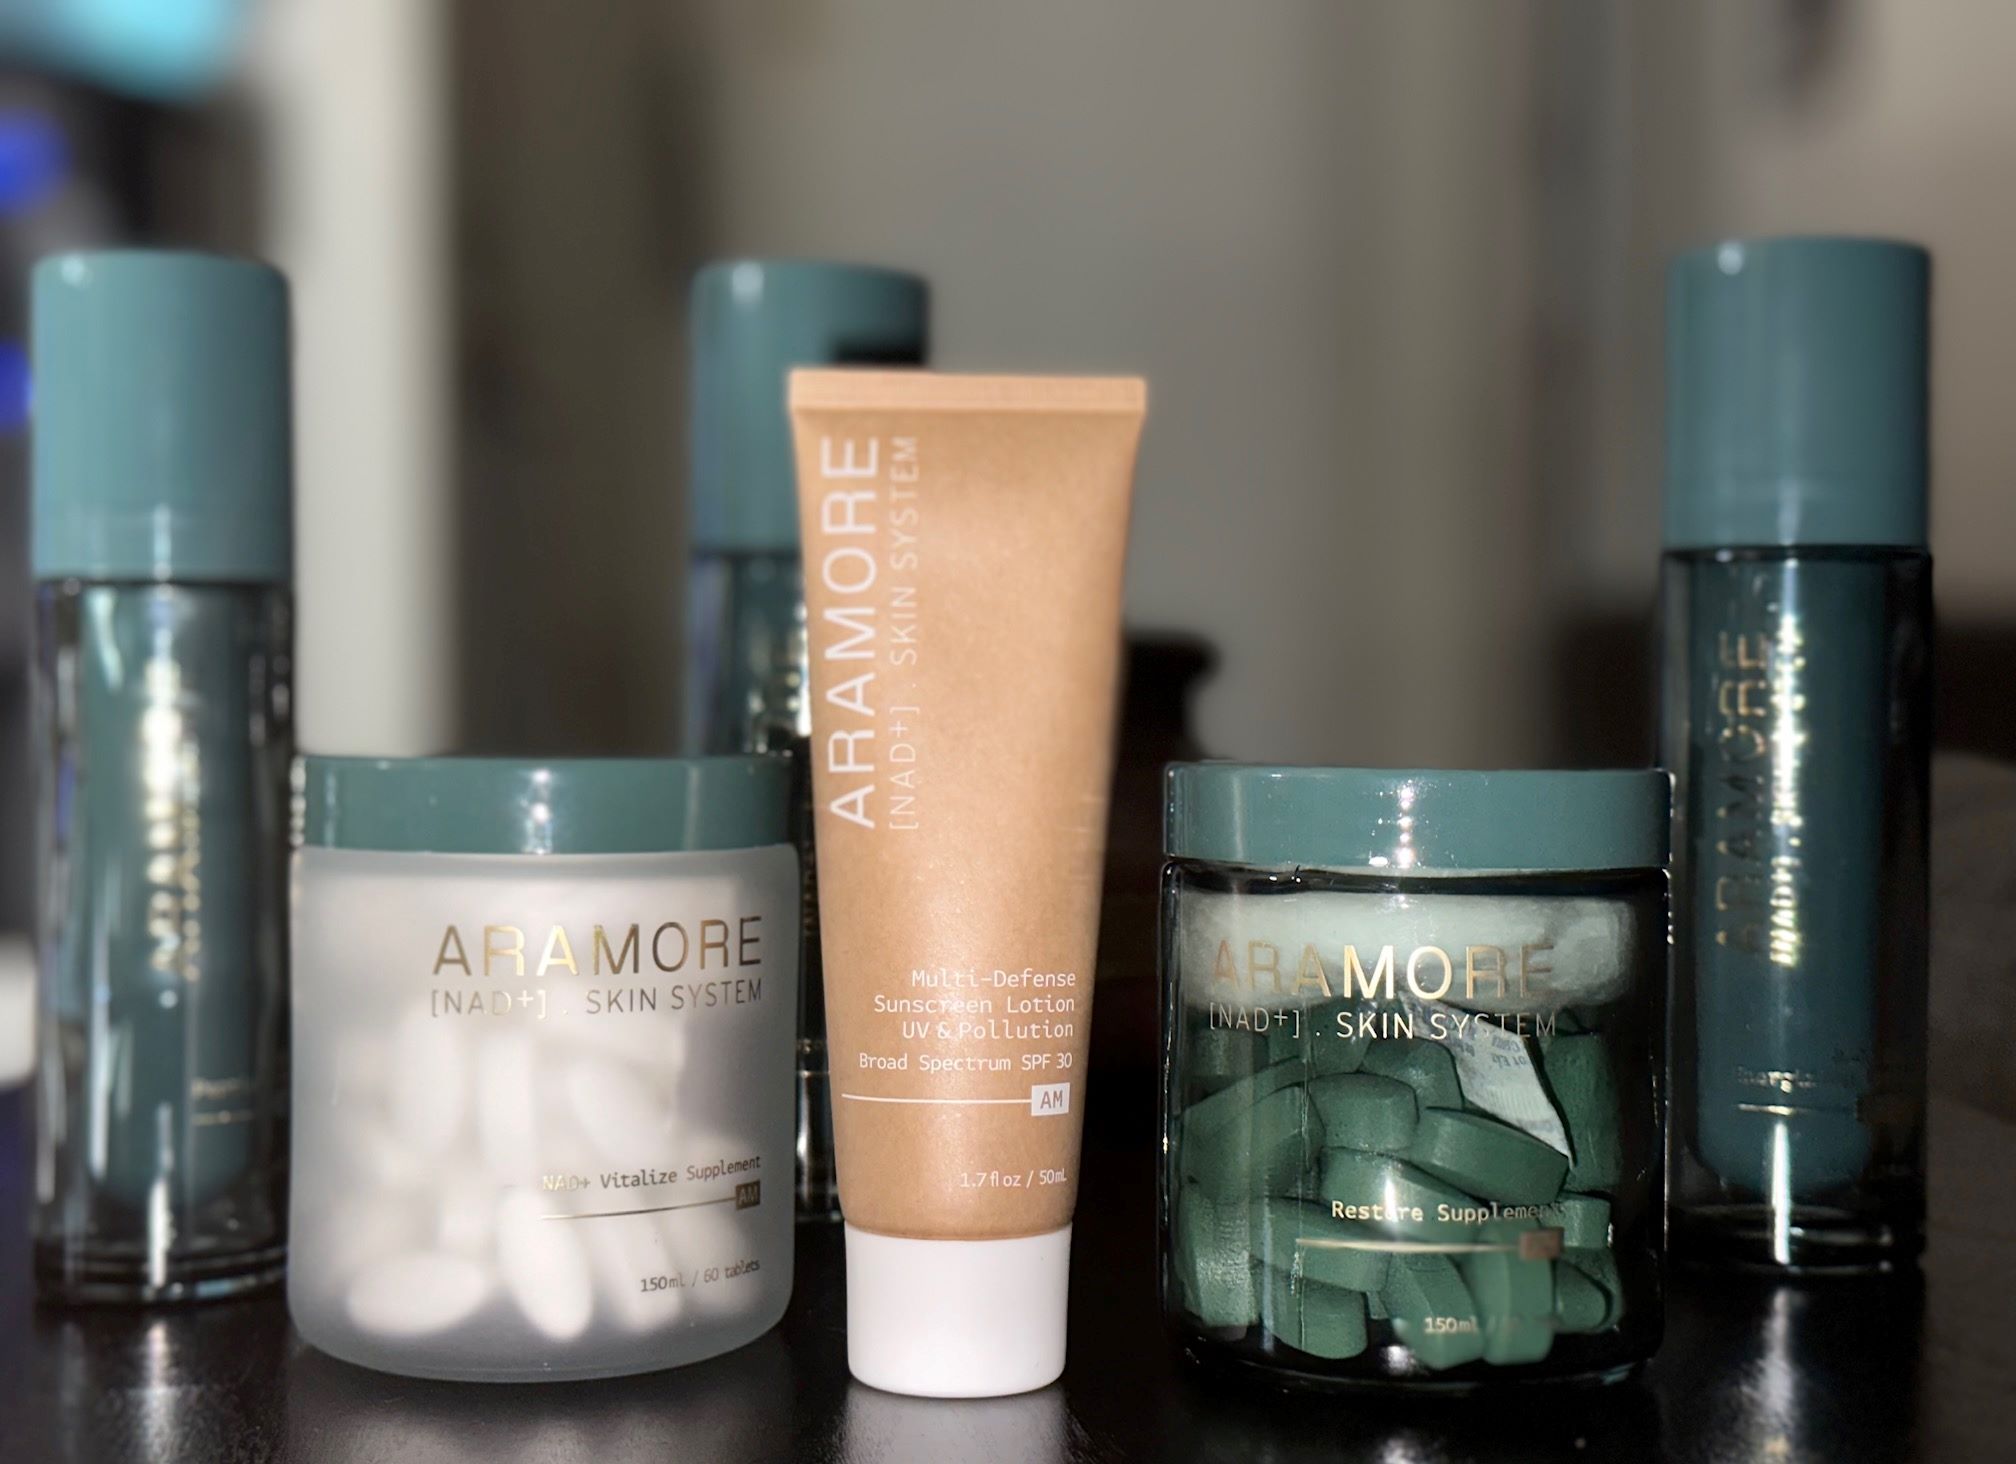 An image of ARAMORE's products.